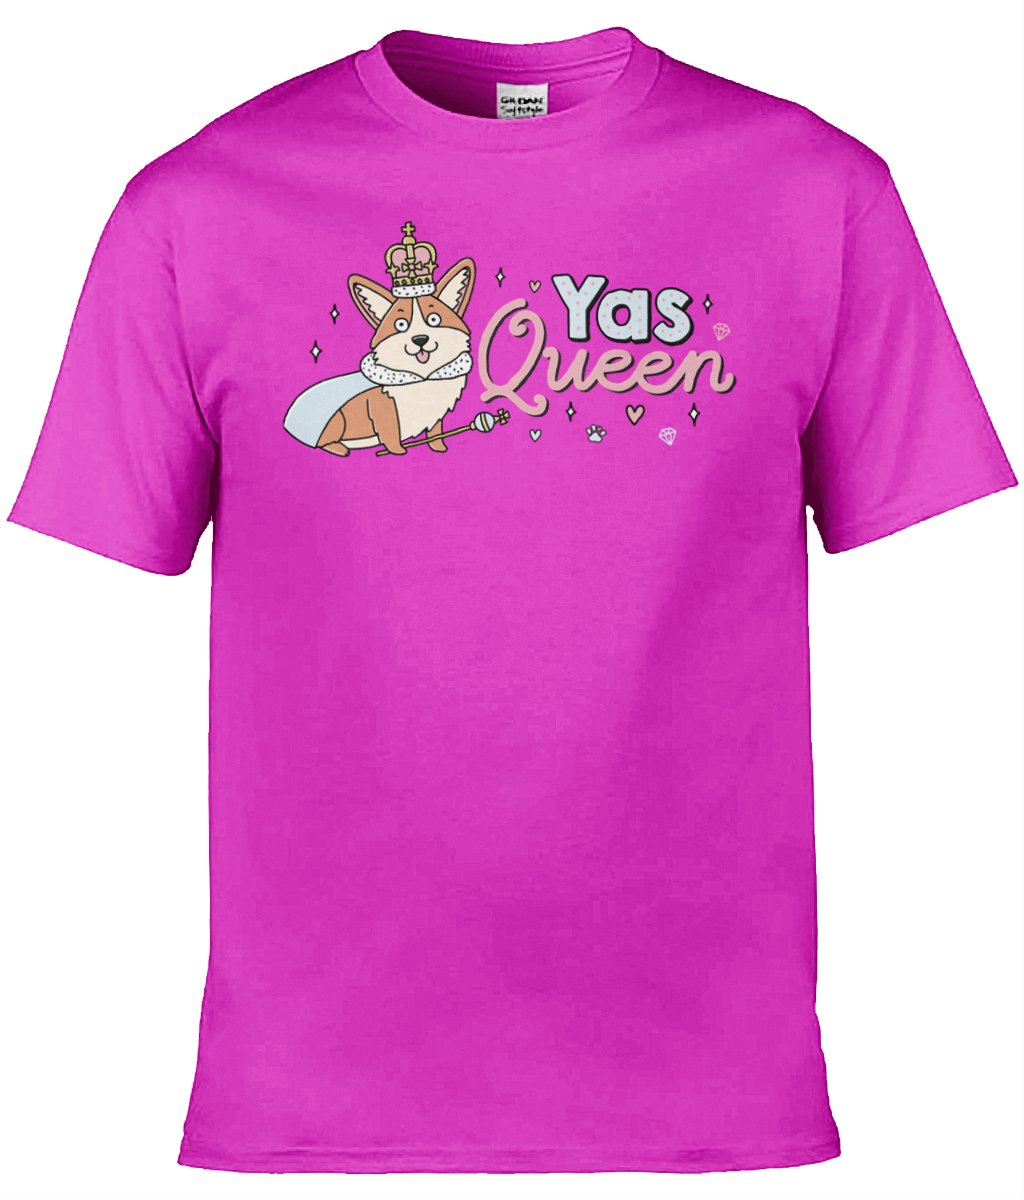 YAS QUEEN T-Shirt - Multi Colour Available